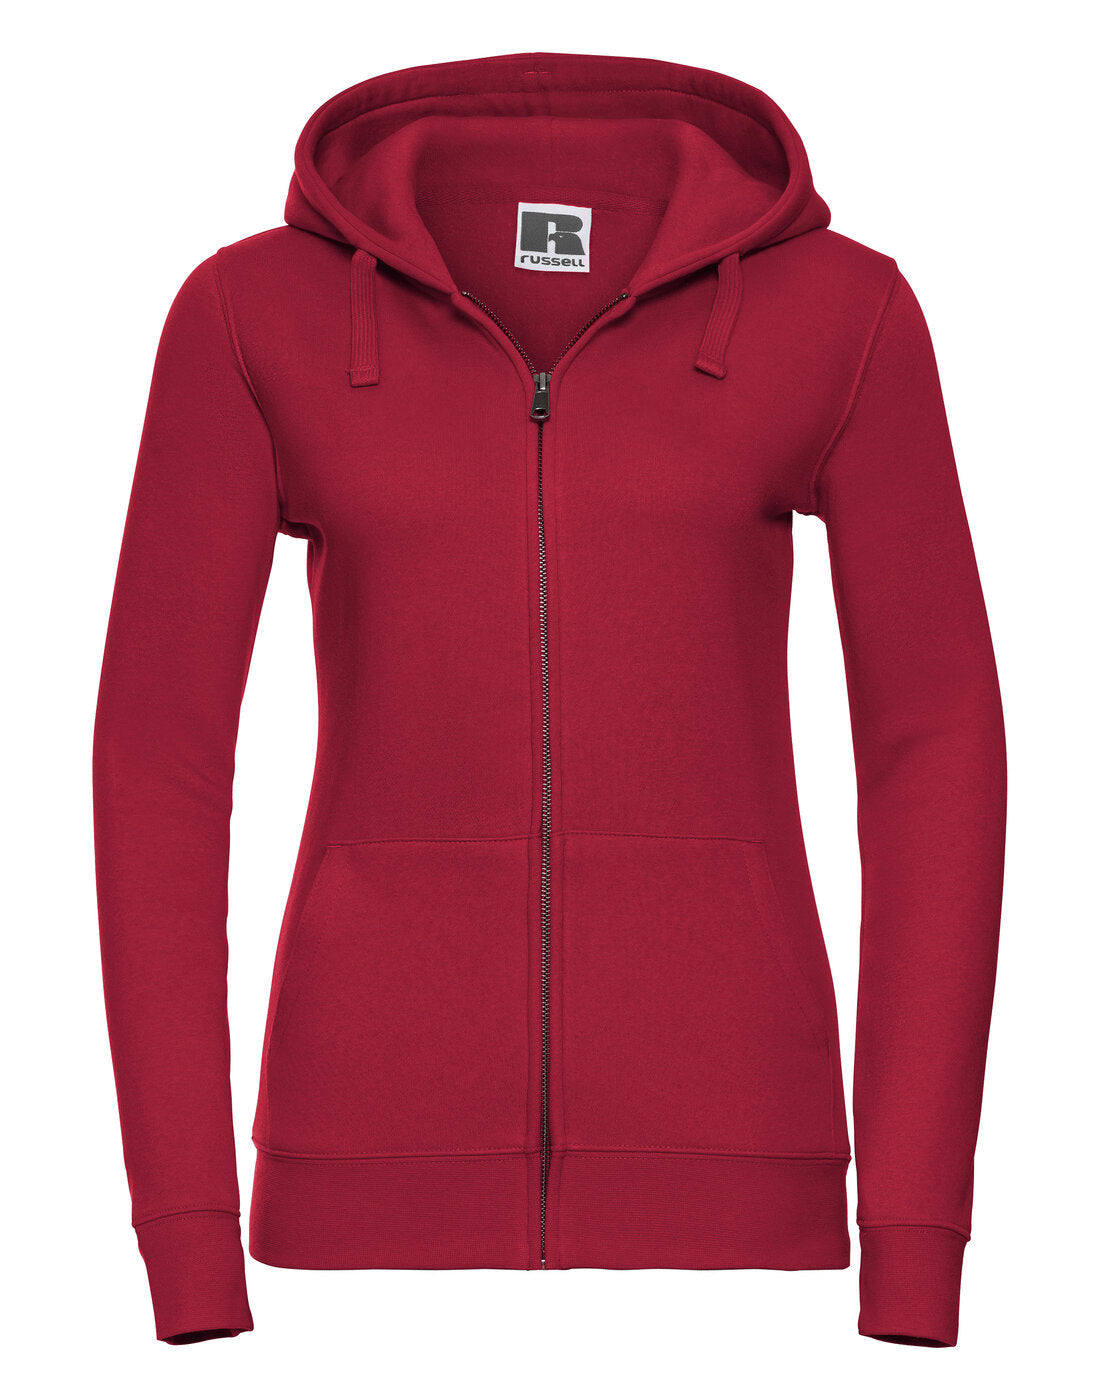 Russell Ladies Authentic Zipped Hood Classic Red